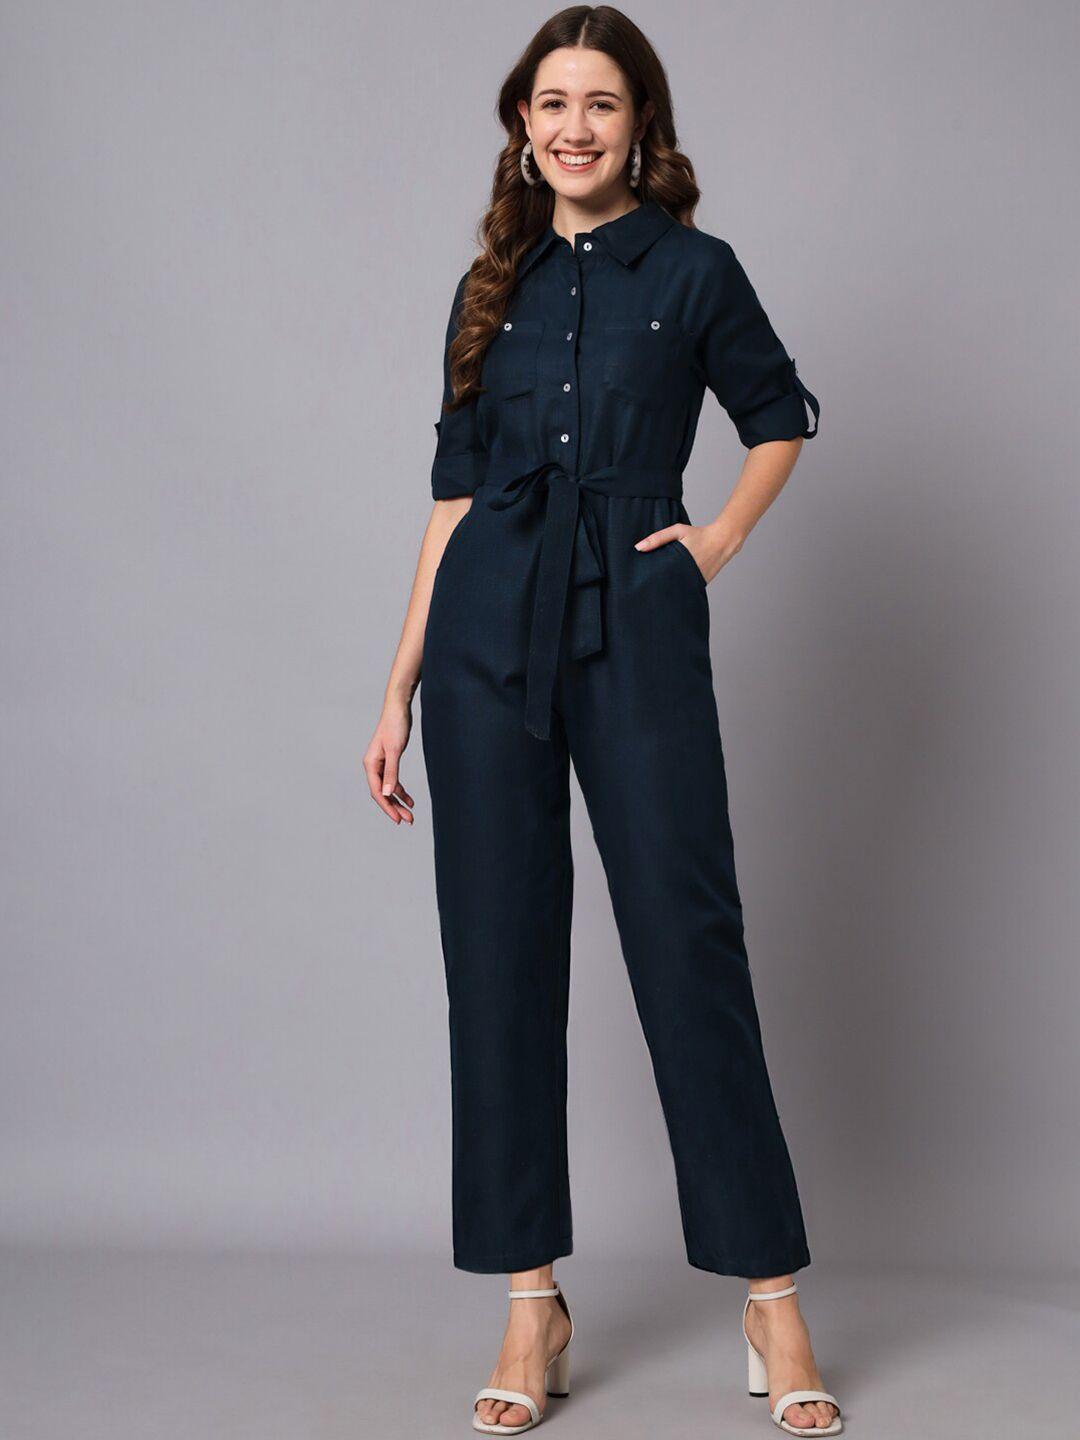 the dry state waist tie-up basic jumpsuit